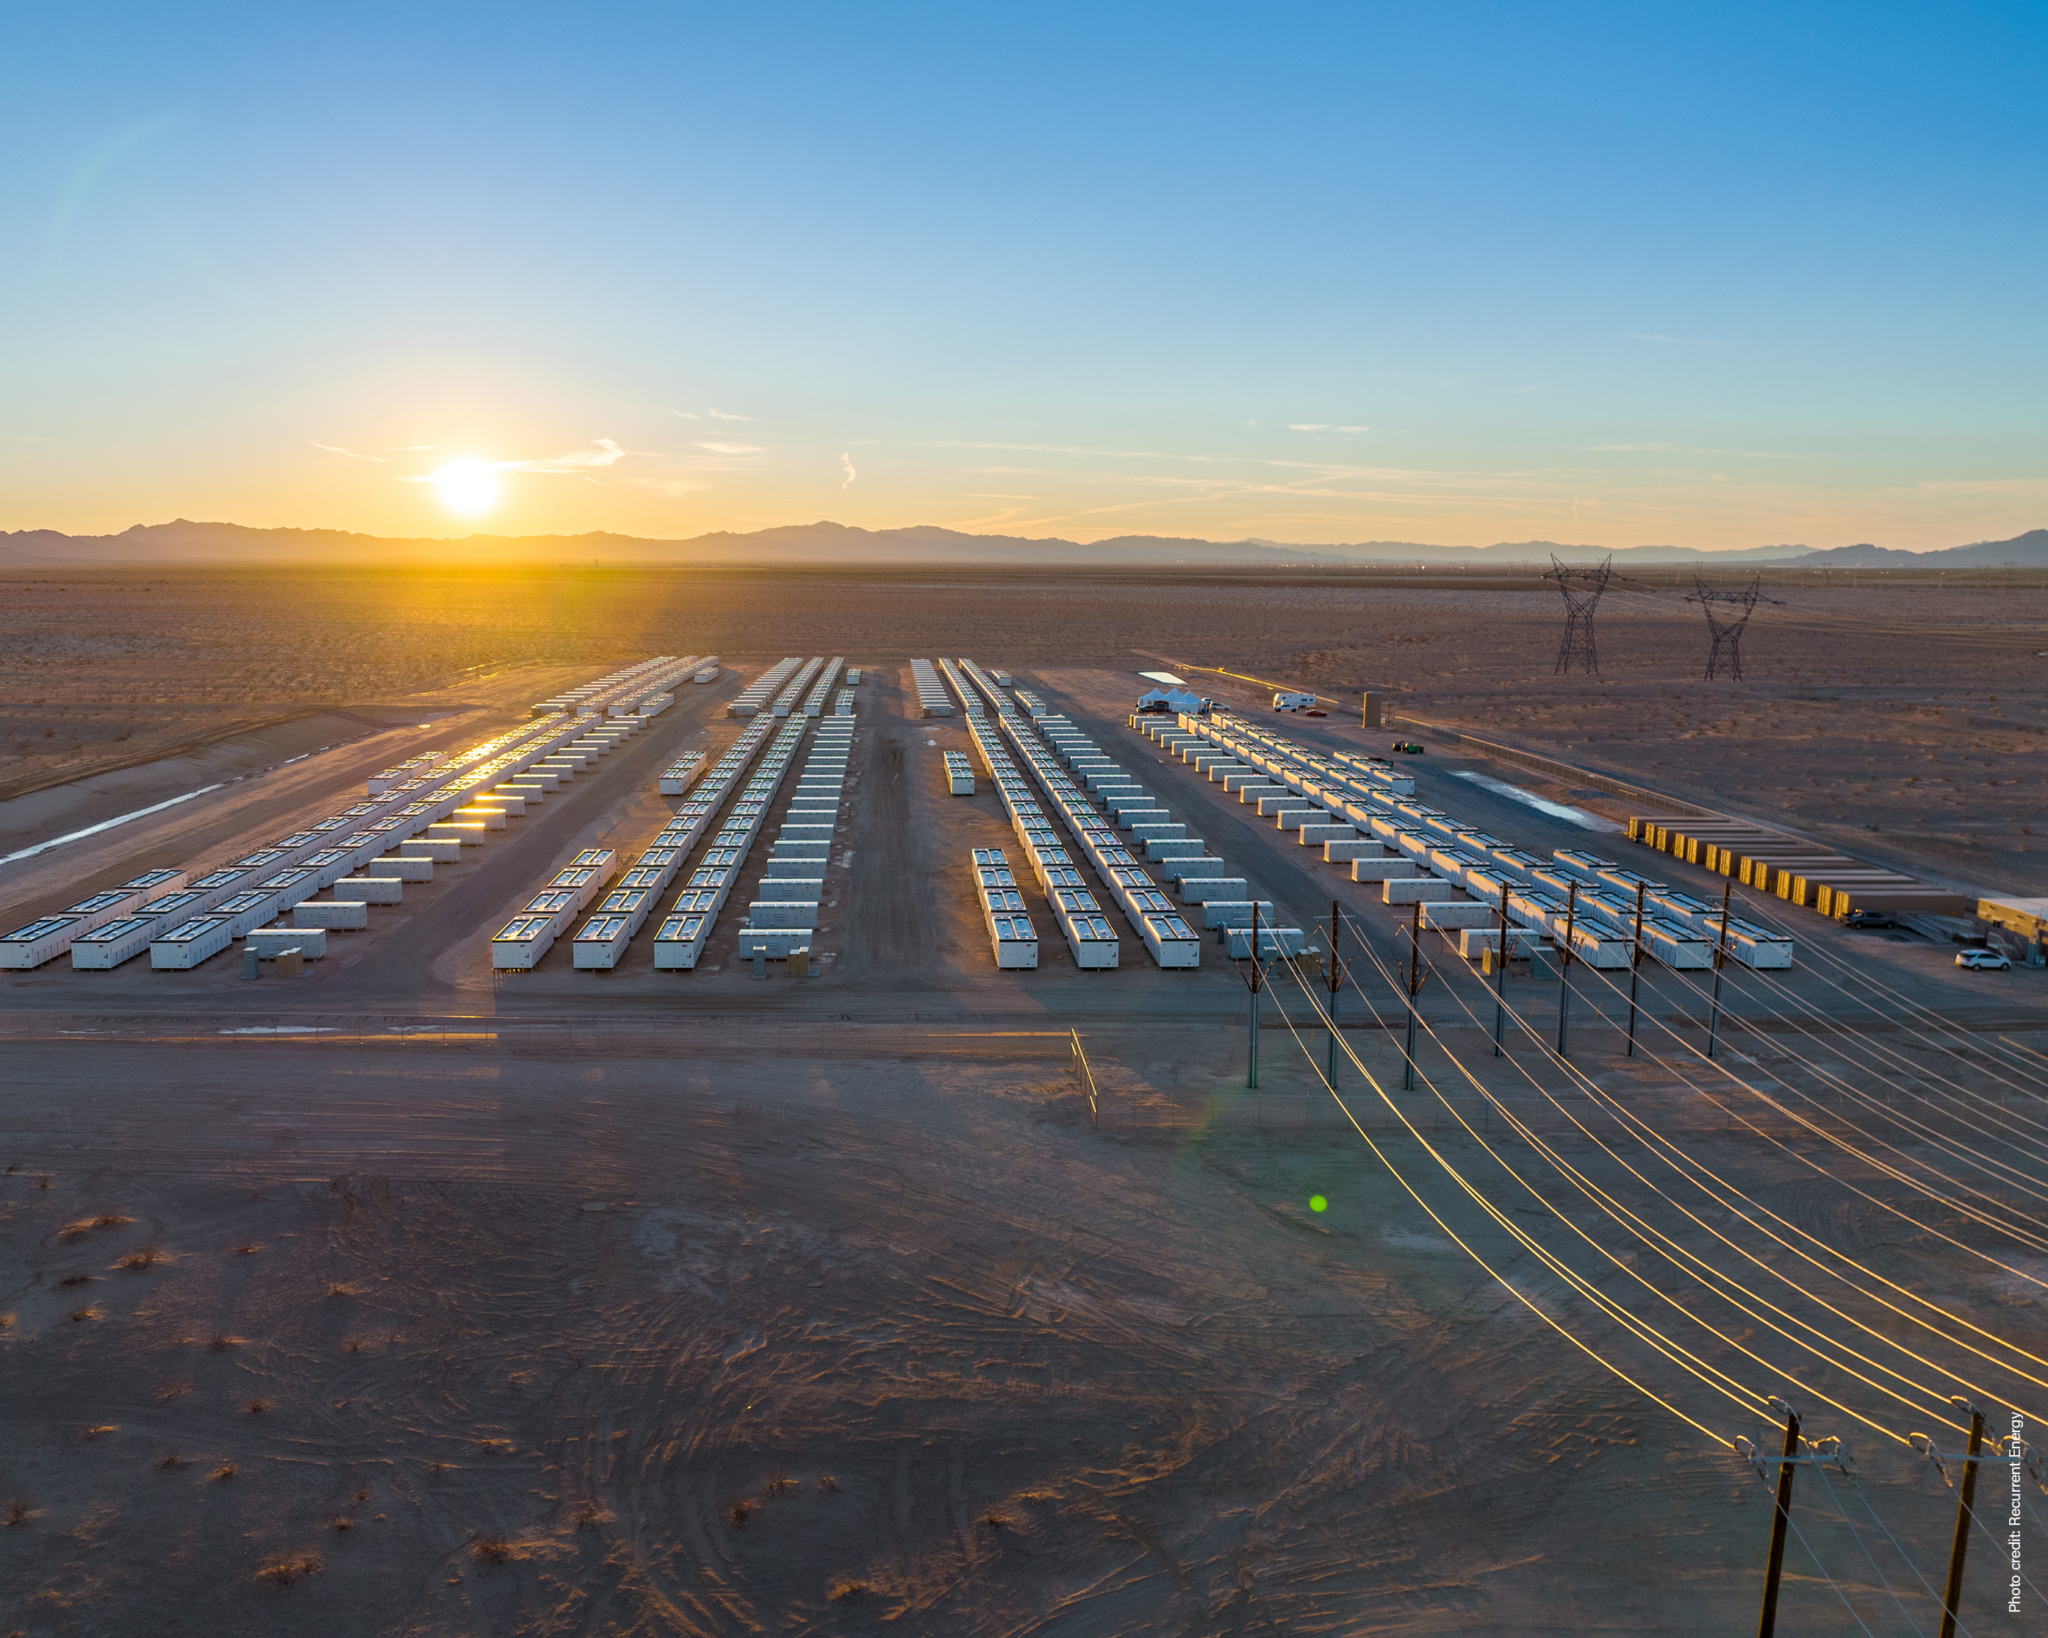 A Utility-Scale Battery Storage Facility and Transmission Lines in the Desert.